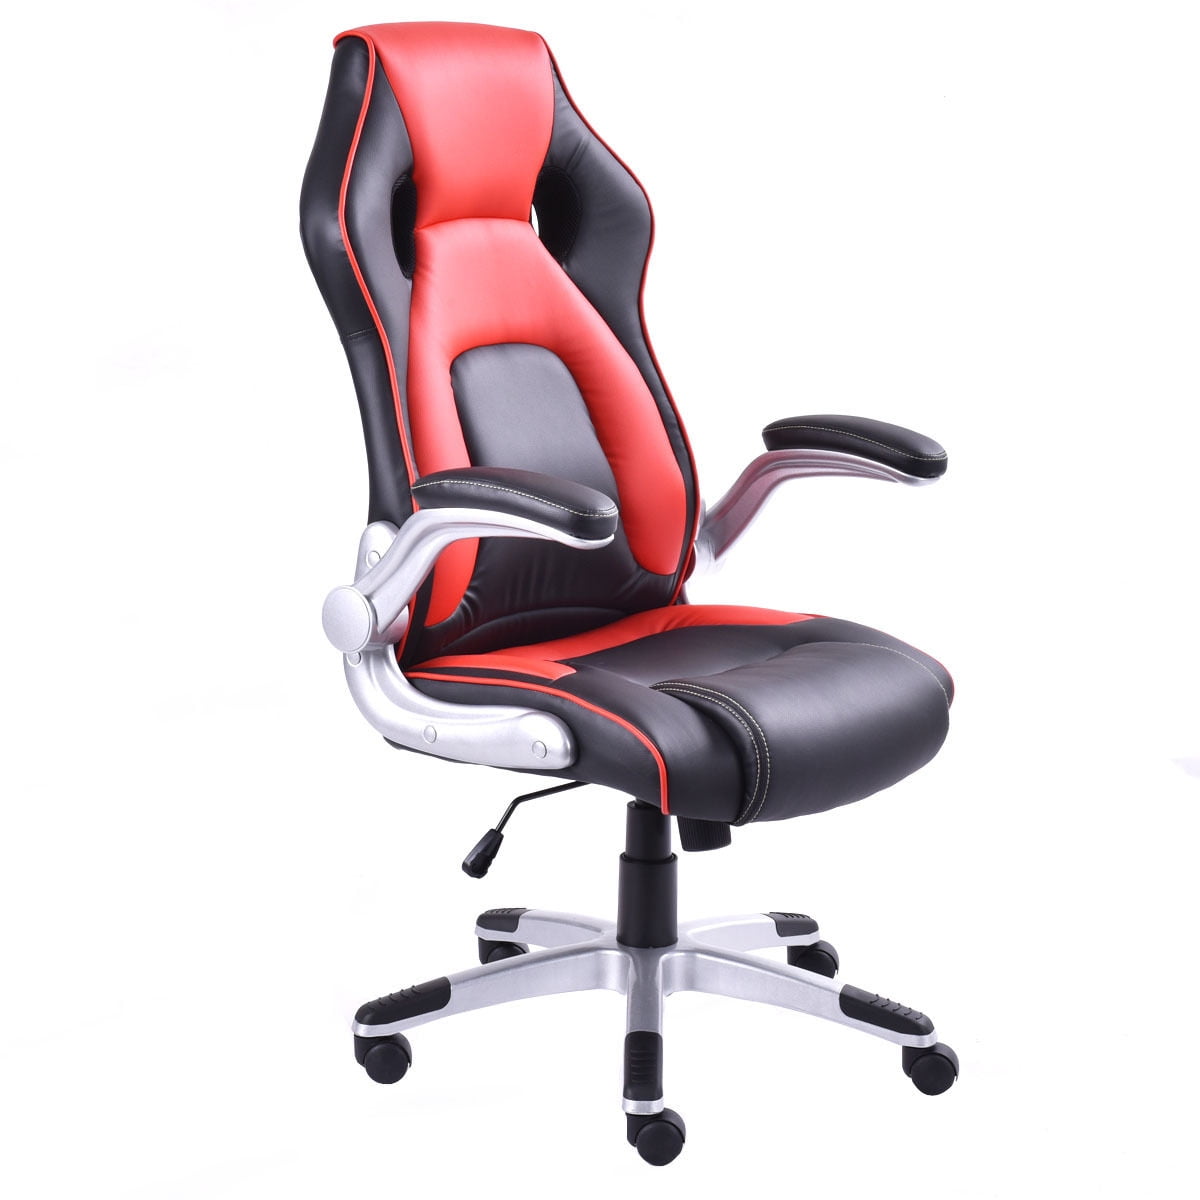 Gymax Office Desk Chair Racing Style Bucket Seat Pu Leather